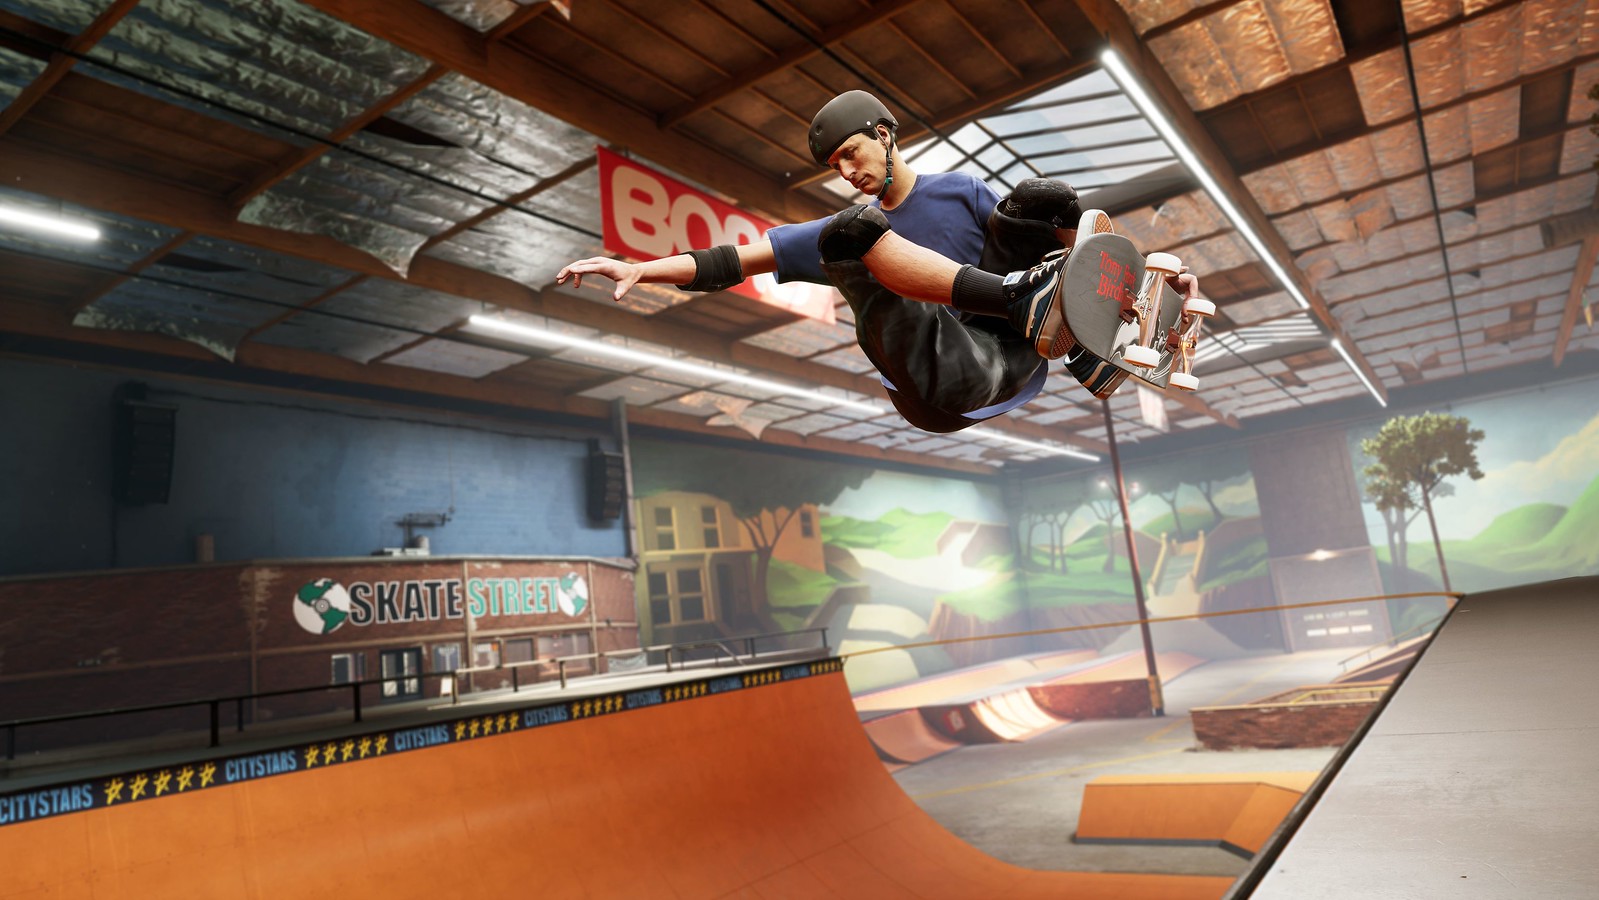 Tony Hawk’s Pro Skater 1 + 2 – coming to PS5 on March 26